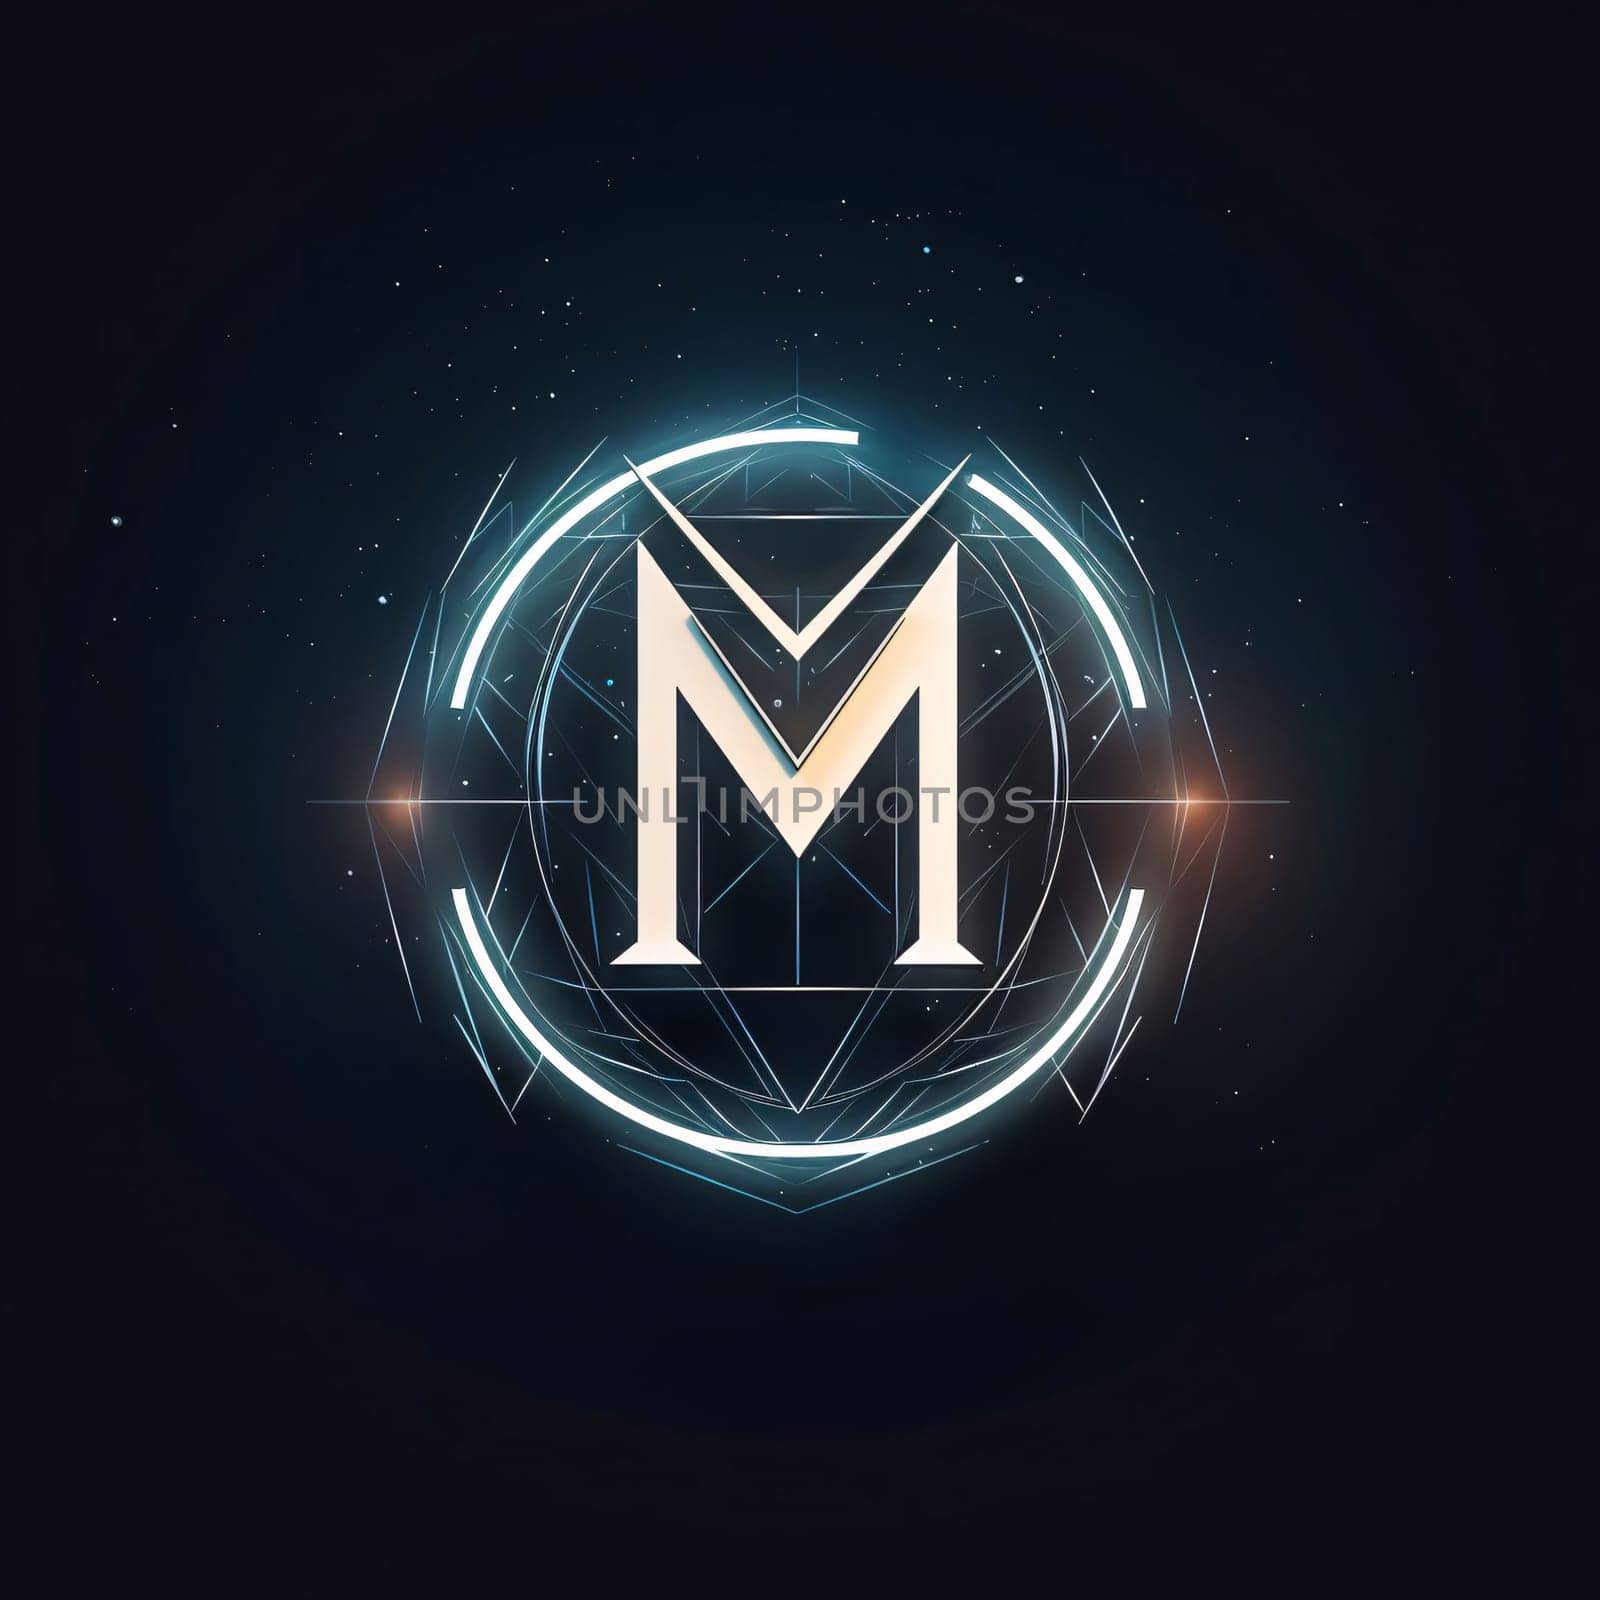 Graphic alphabet letters: Mystical geometry symbol of the letter M in a circle. Vector illustration.